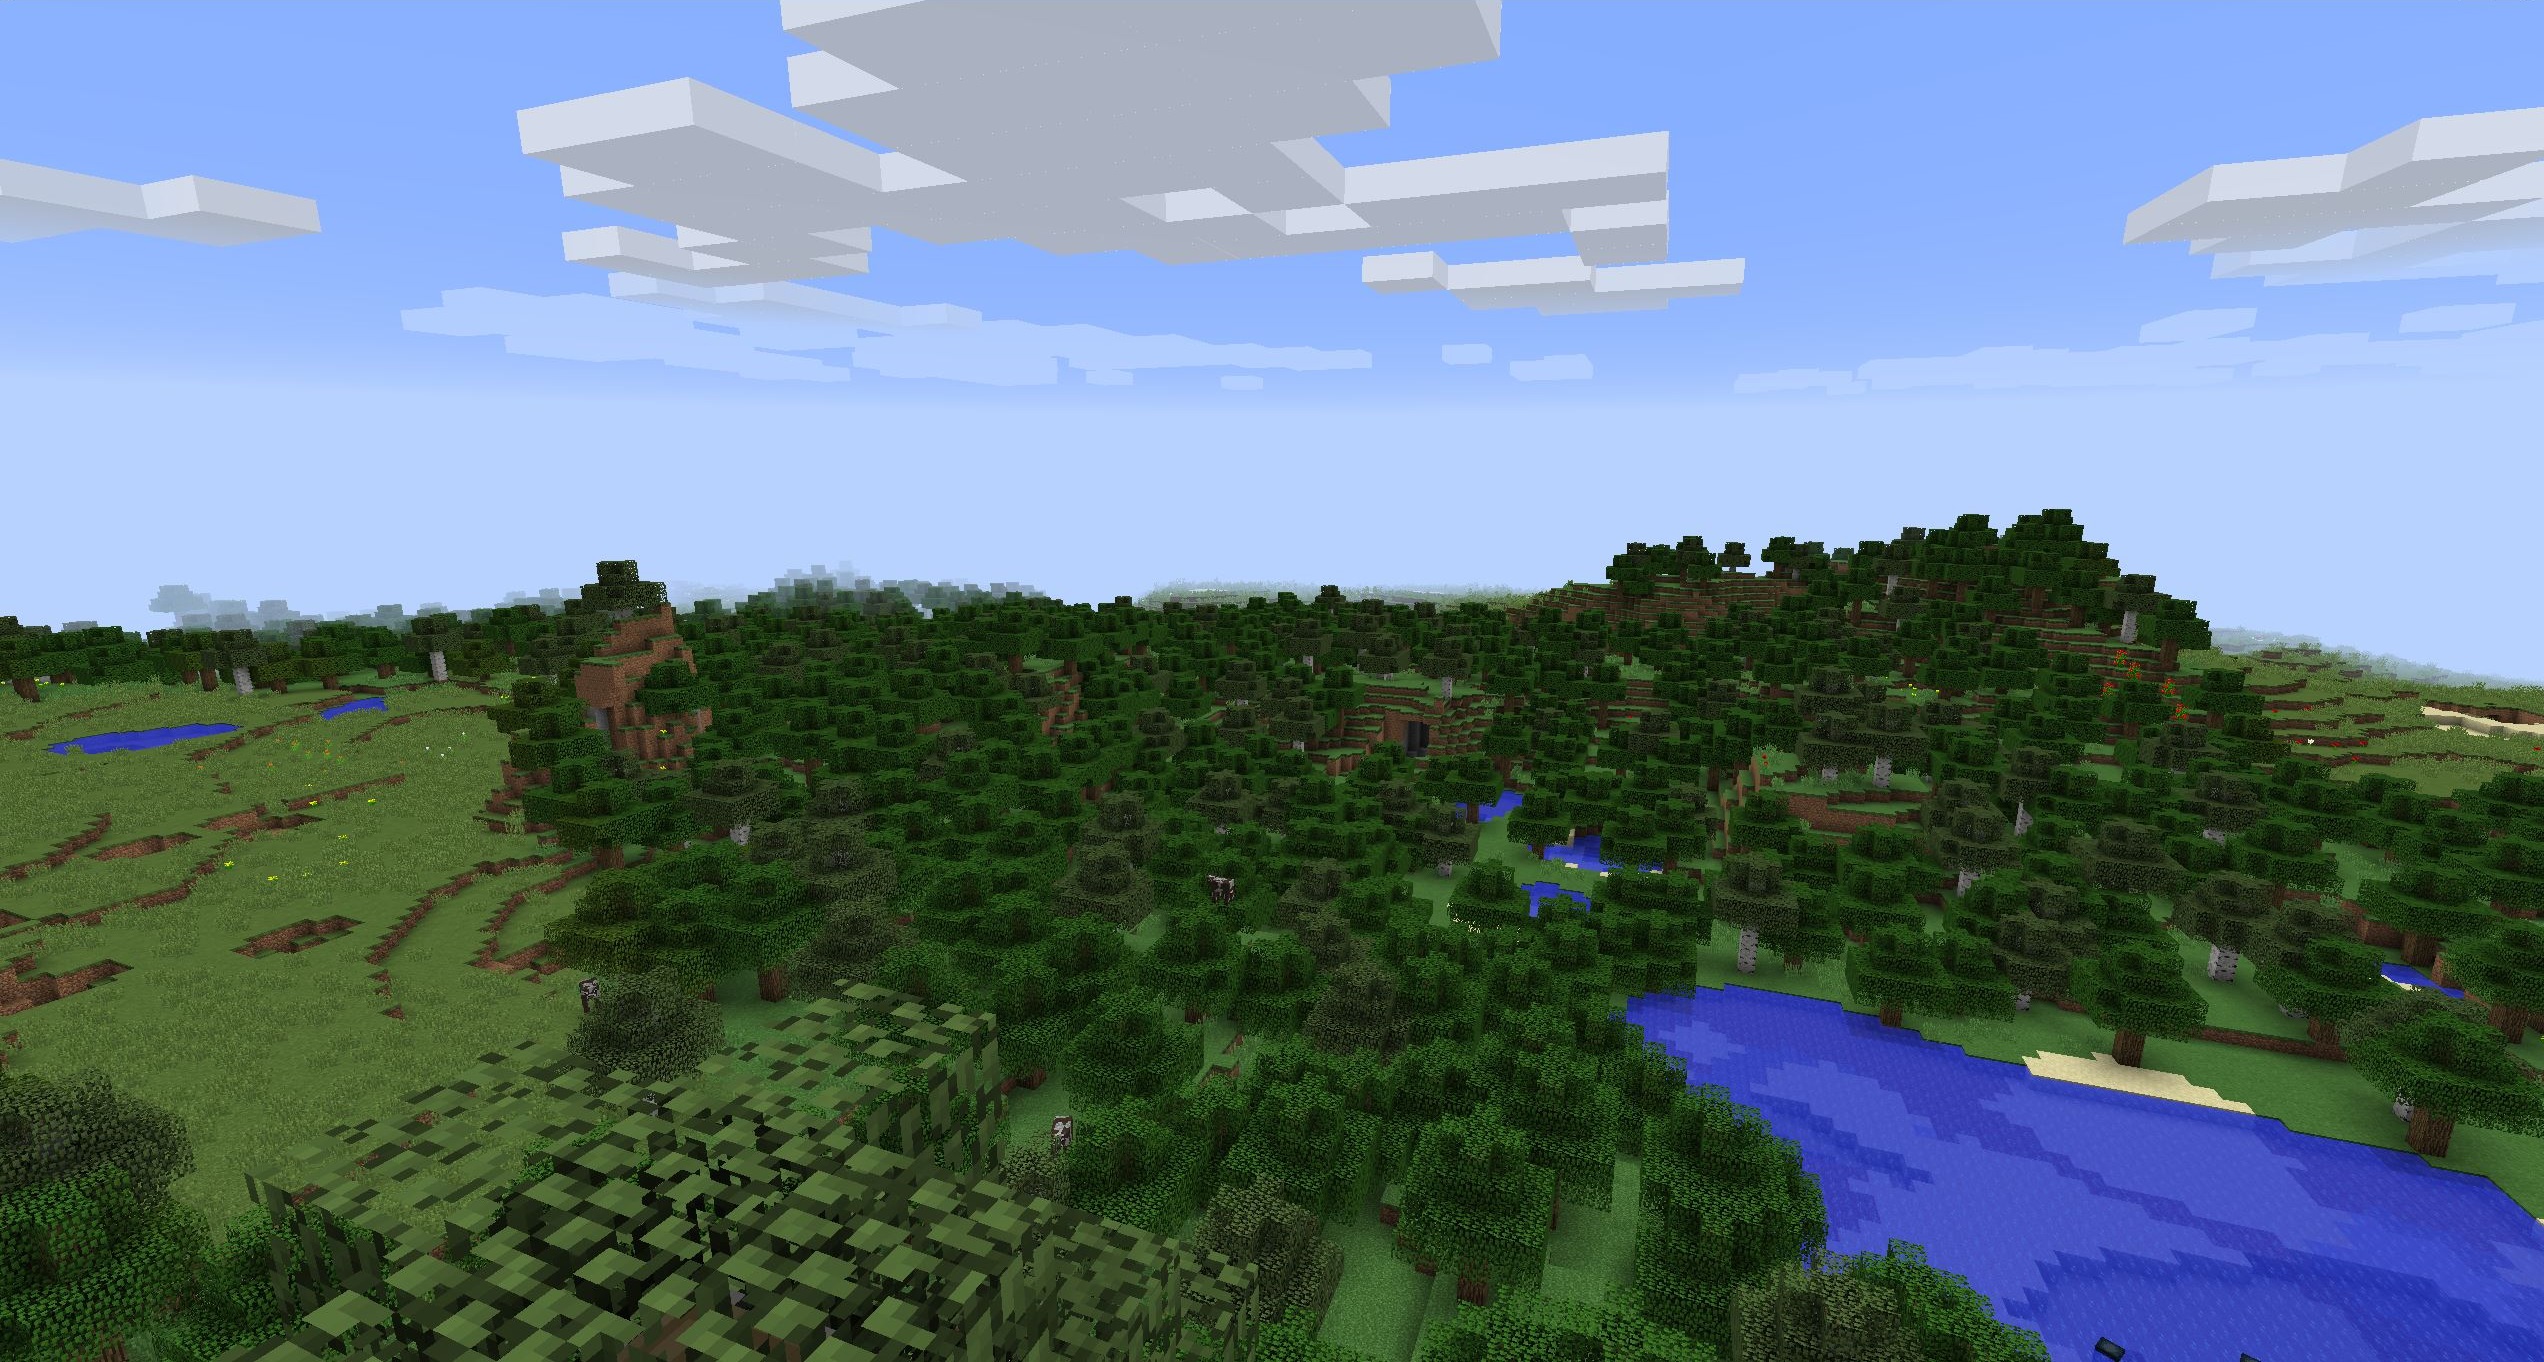 Why I love being alone in Minecraft